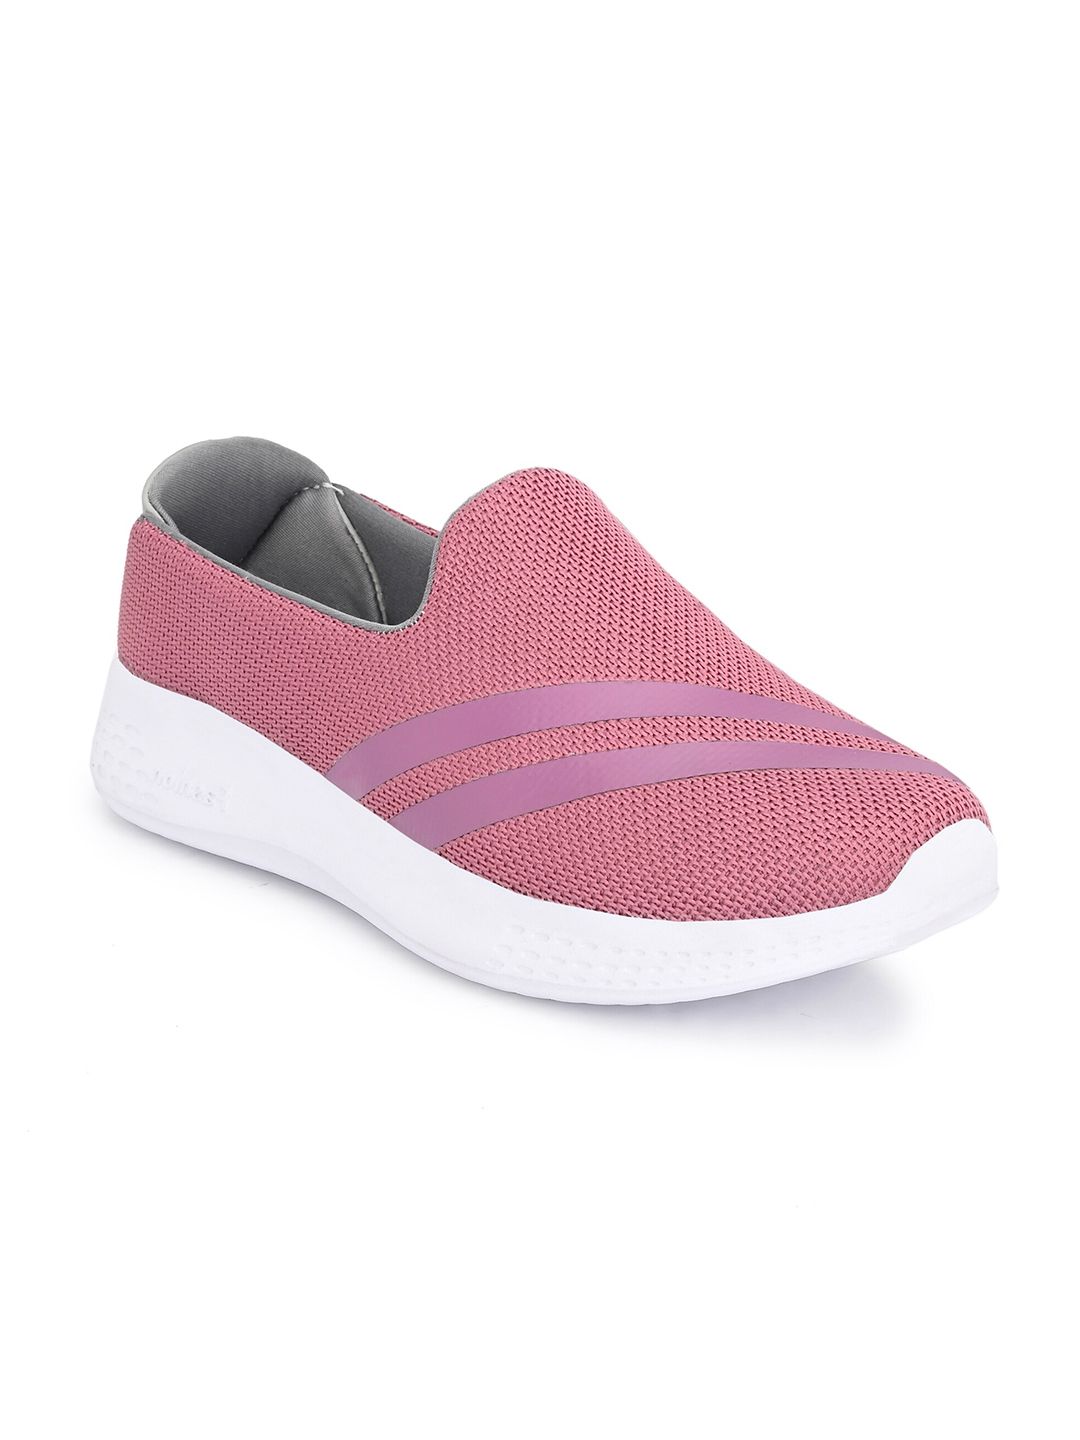 OFF LIMITS Women Mauve Mesh Walking Non-Marking Shoes Price in India